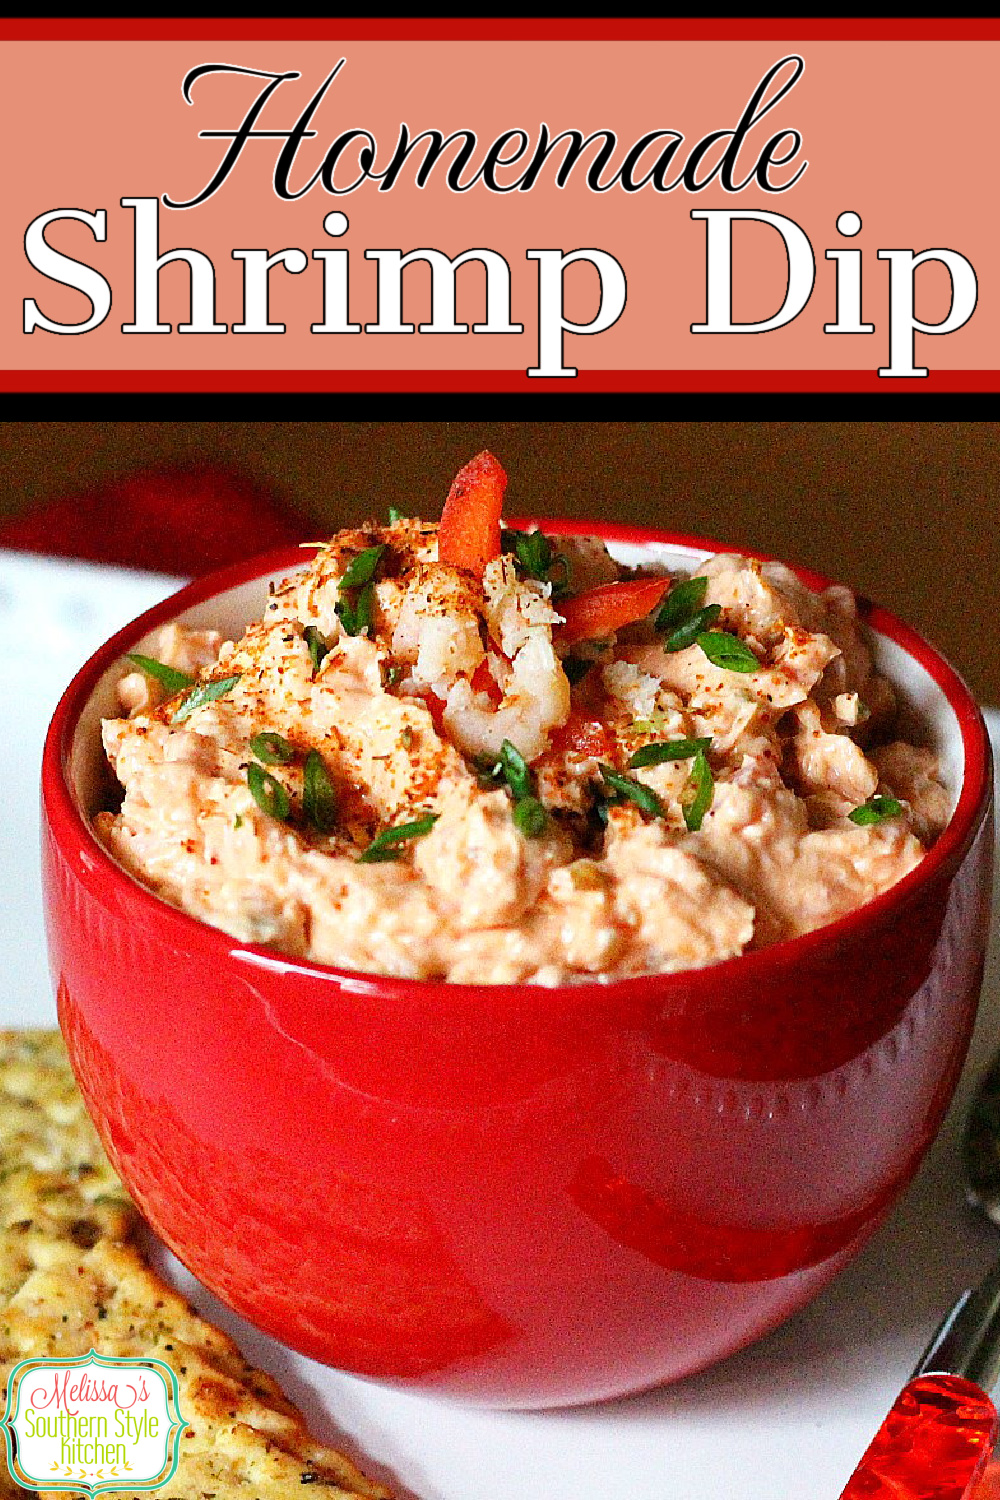 This Shrimp Dip Recipe can be enjoyed as an appetizer with crackers or pita chips or, as a spread for croissants and sandwiches #shrimpdip #shrimpdiprecipe #seafooddip #seafoodrecipes #shrimp #easyrecipes #appetizers #partyfood #holidayrecipes #southernrecipes #southernfood